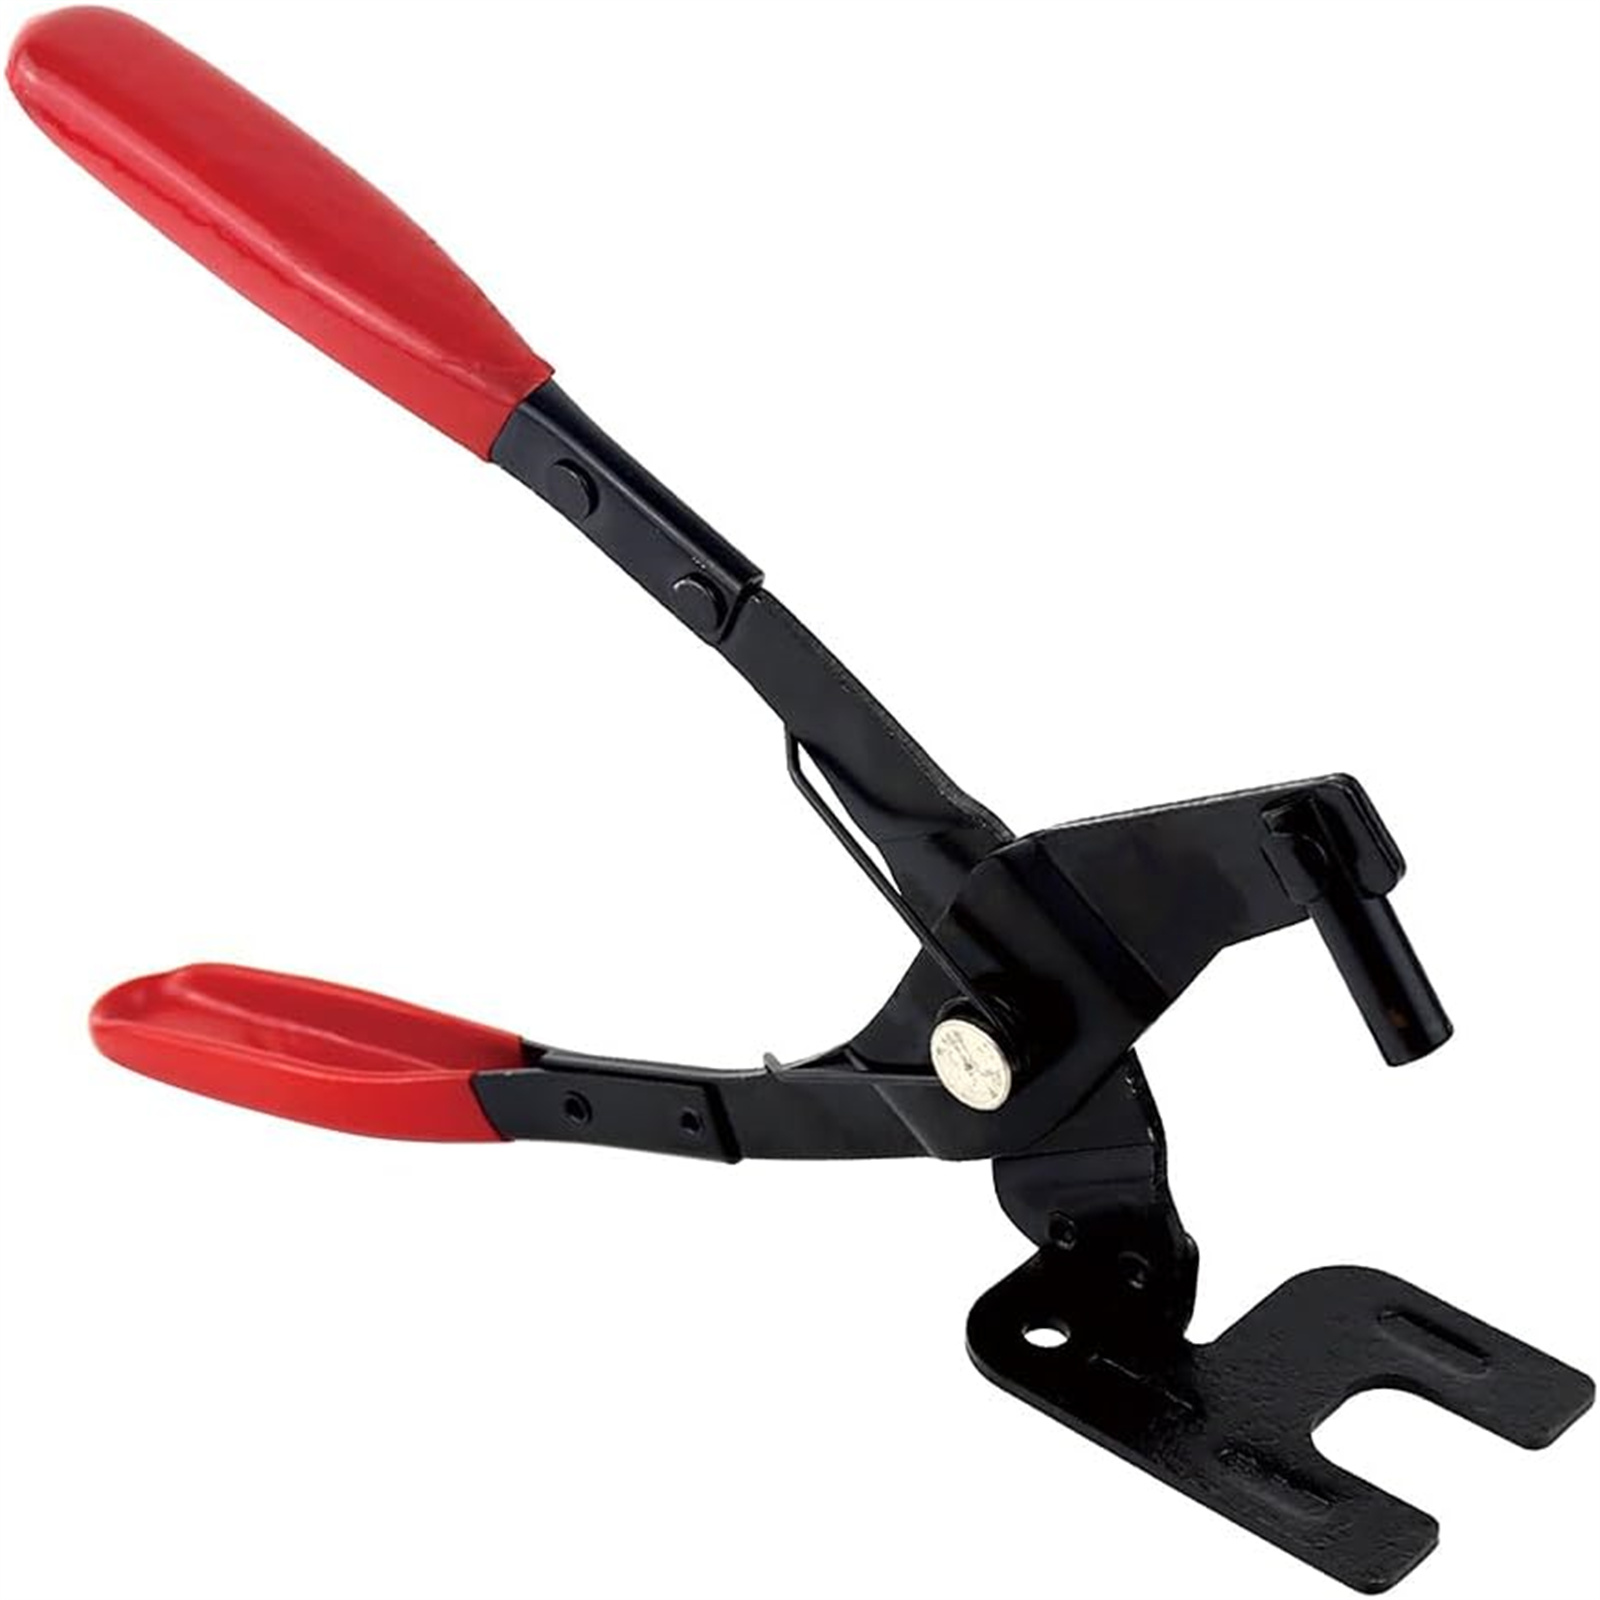 Exhaust Hanger Removal Pliers Exhaust Hanger Rubber Pad Separation Disassembly Tools For All Exhaust Rubber Hangers as shown